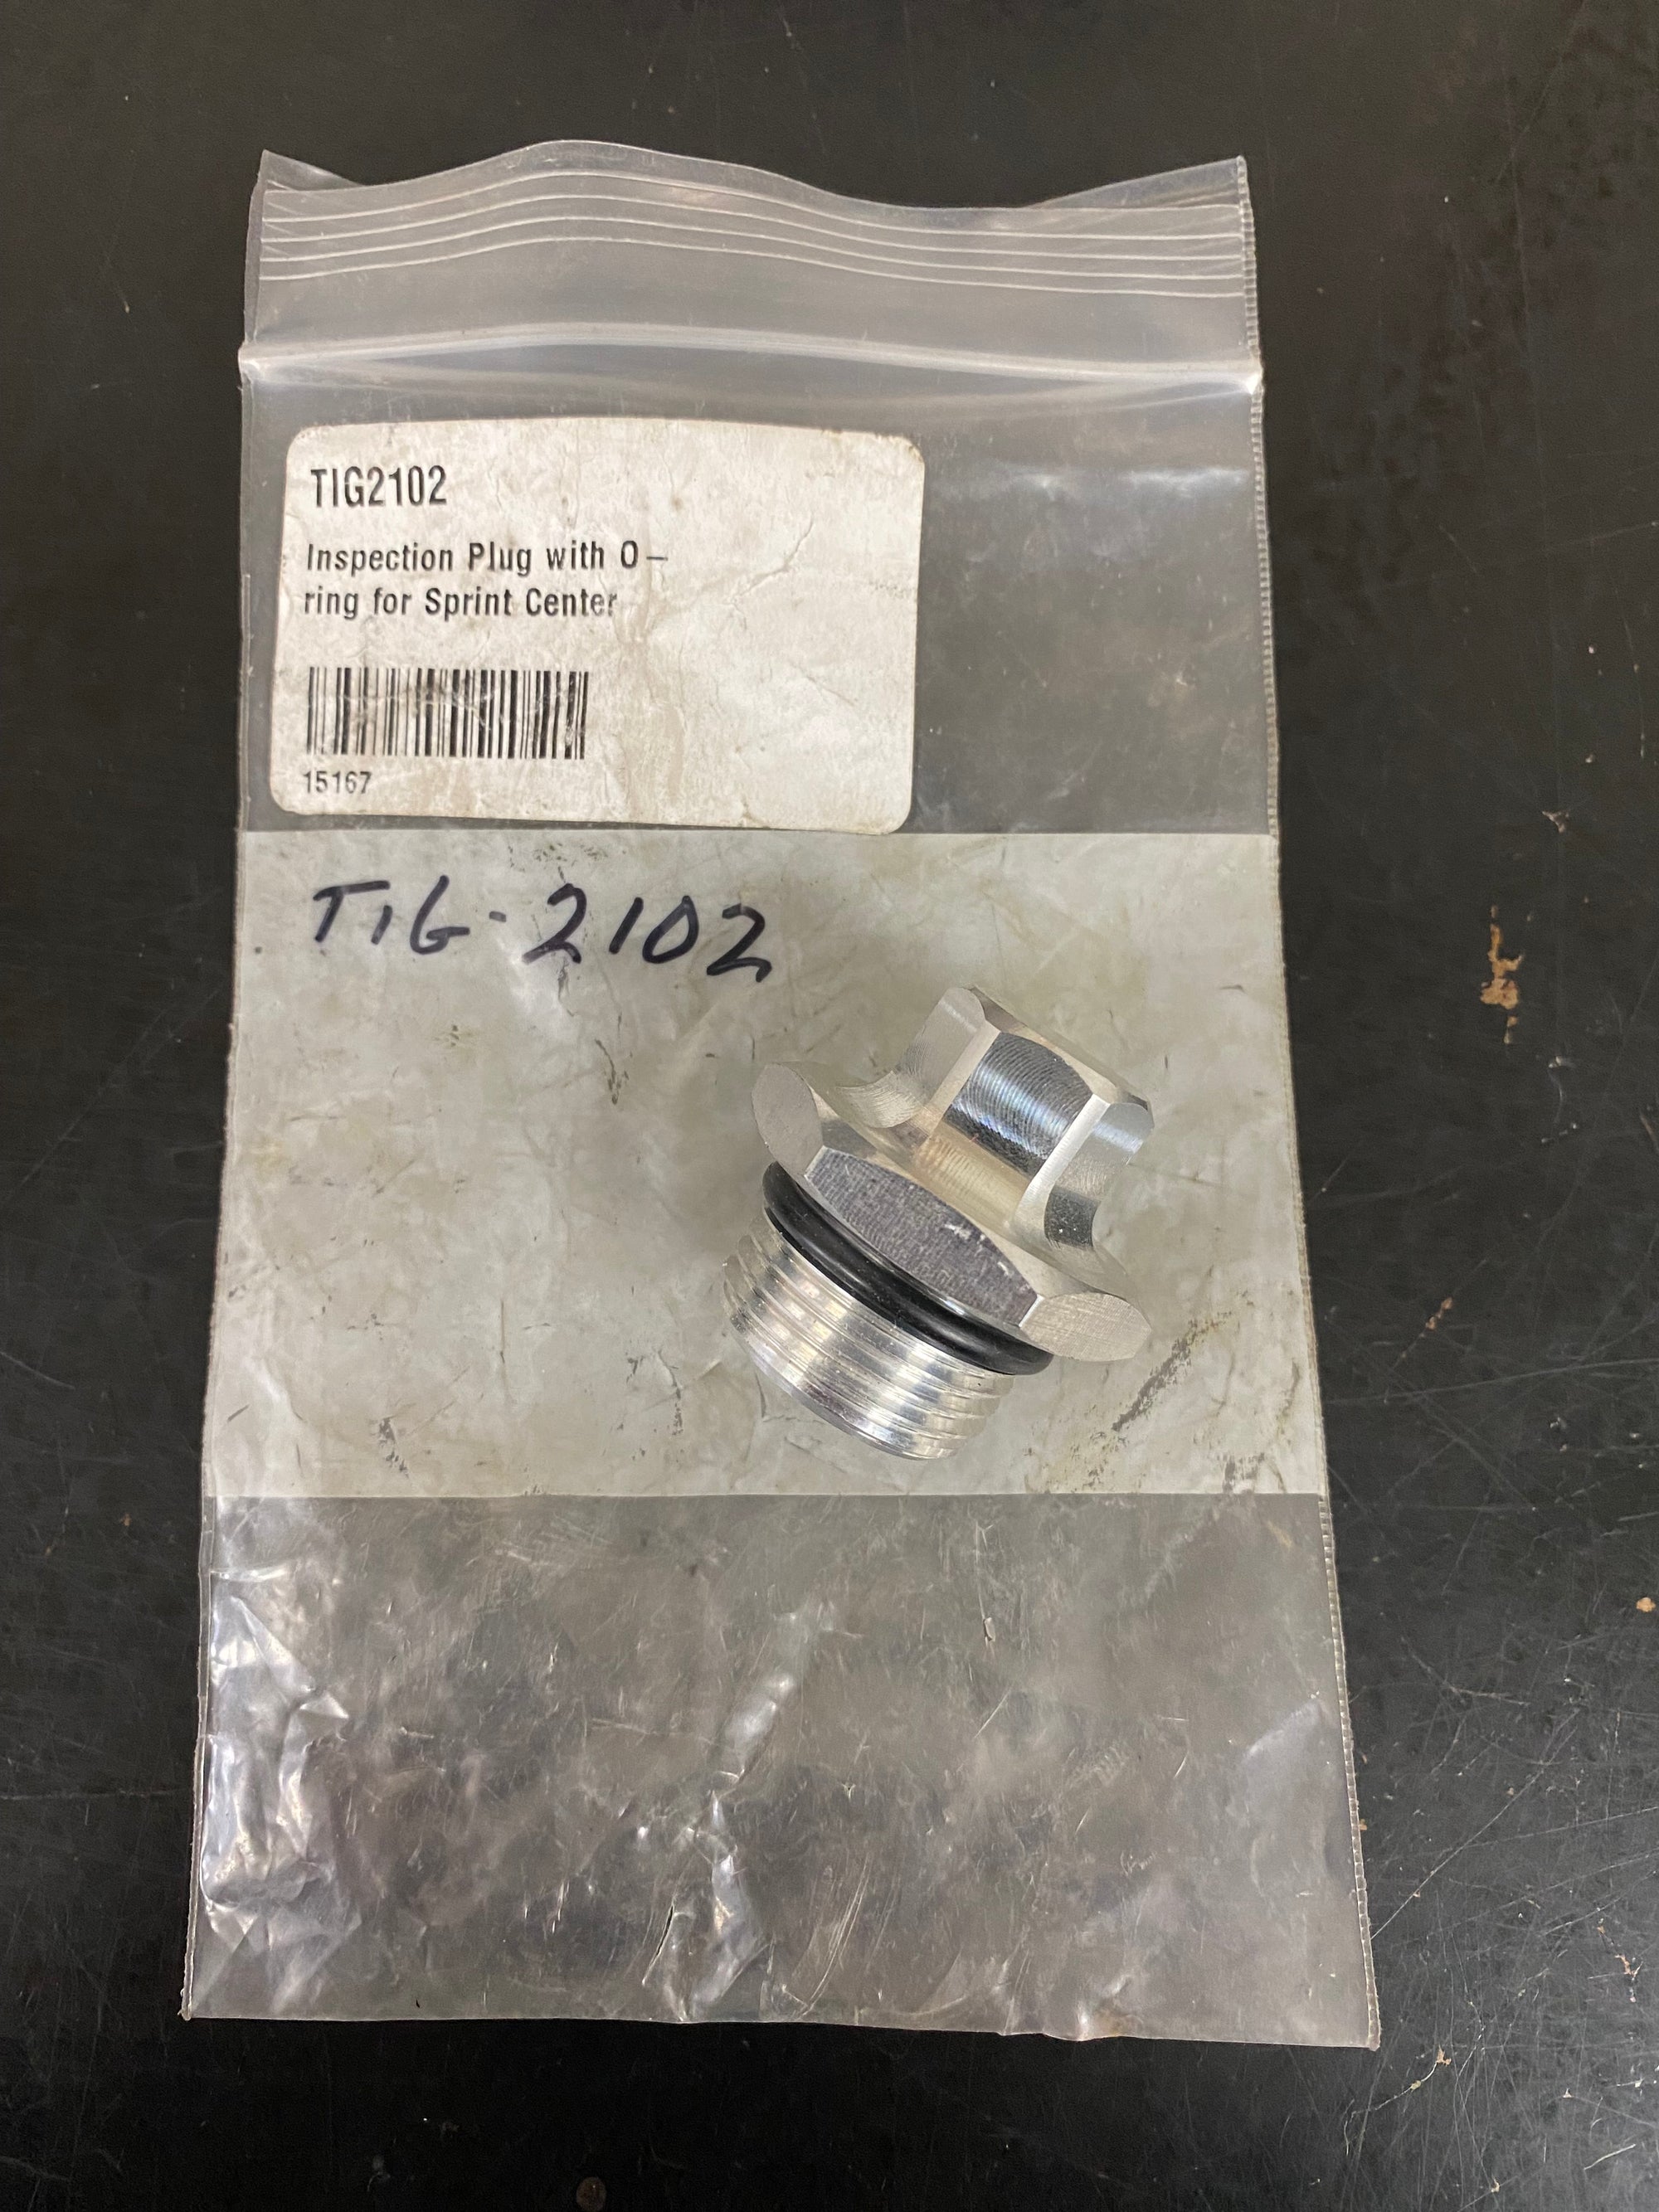 USED INSPECTION PLUG W/ O-RING FOR SPRINT CENTER